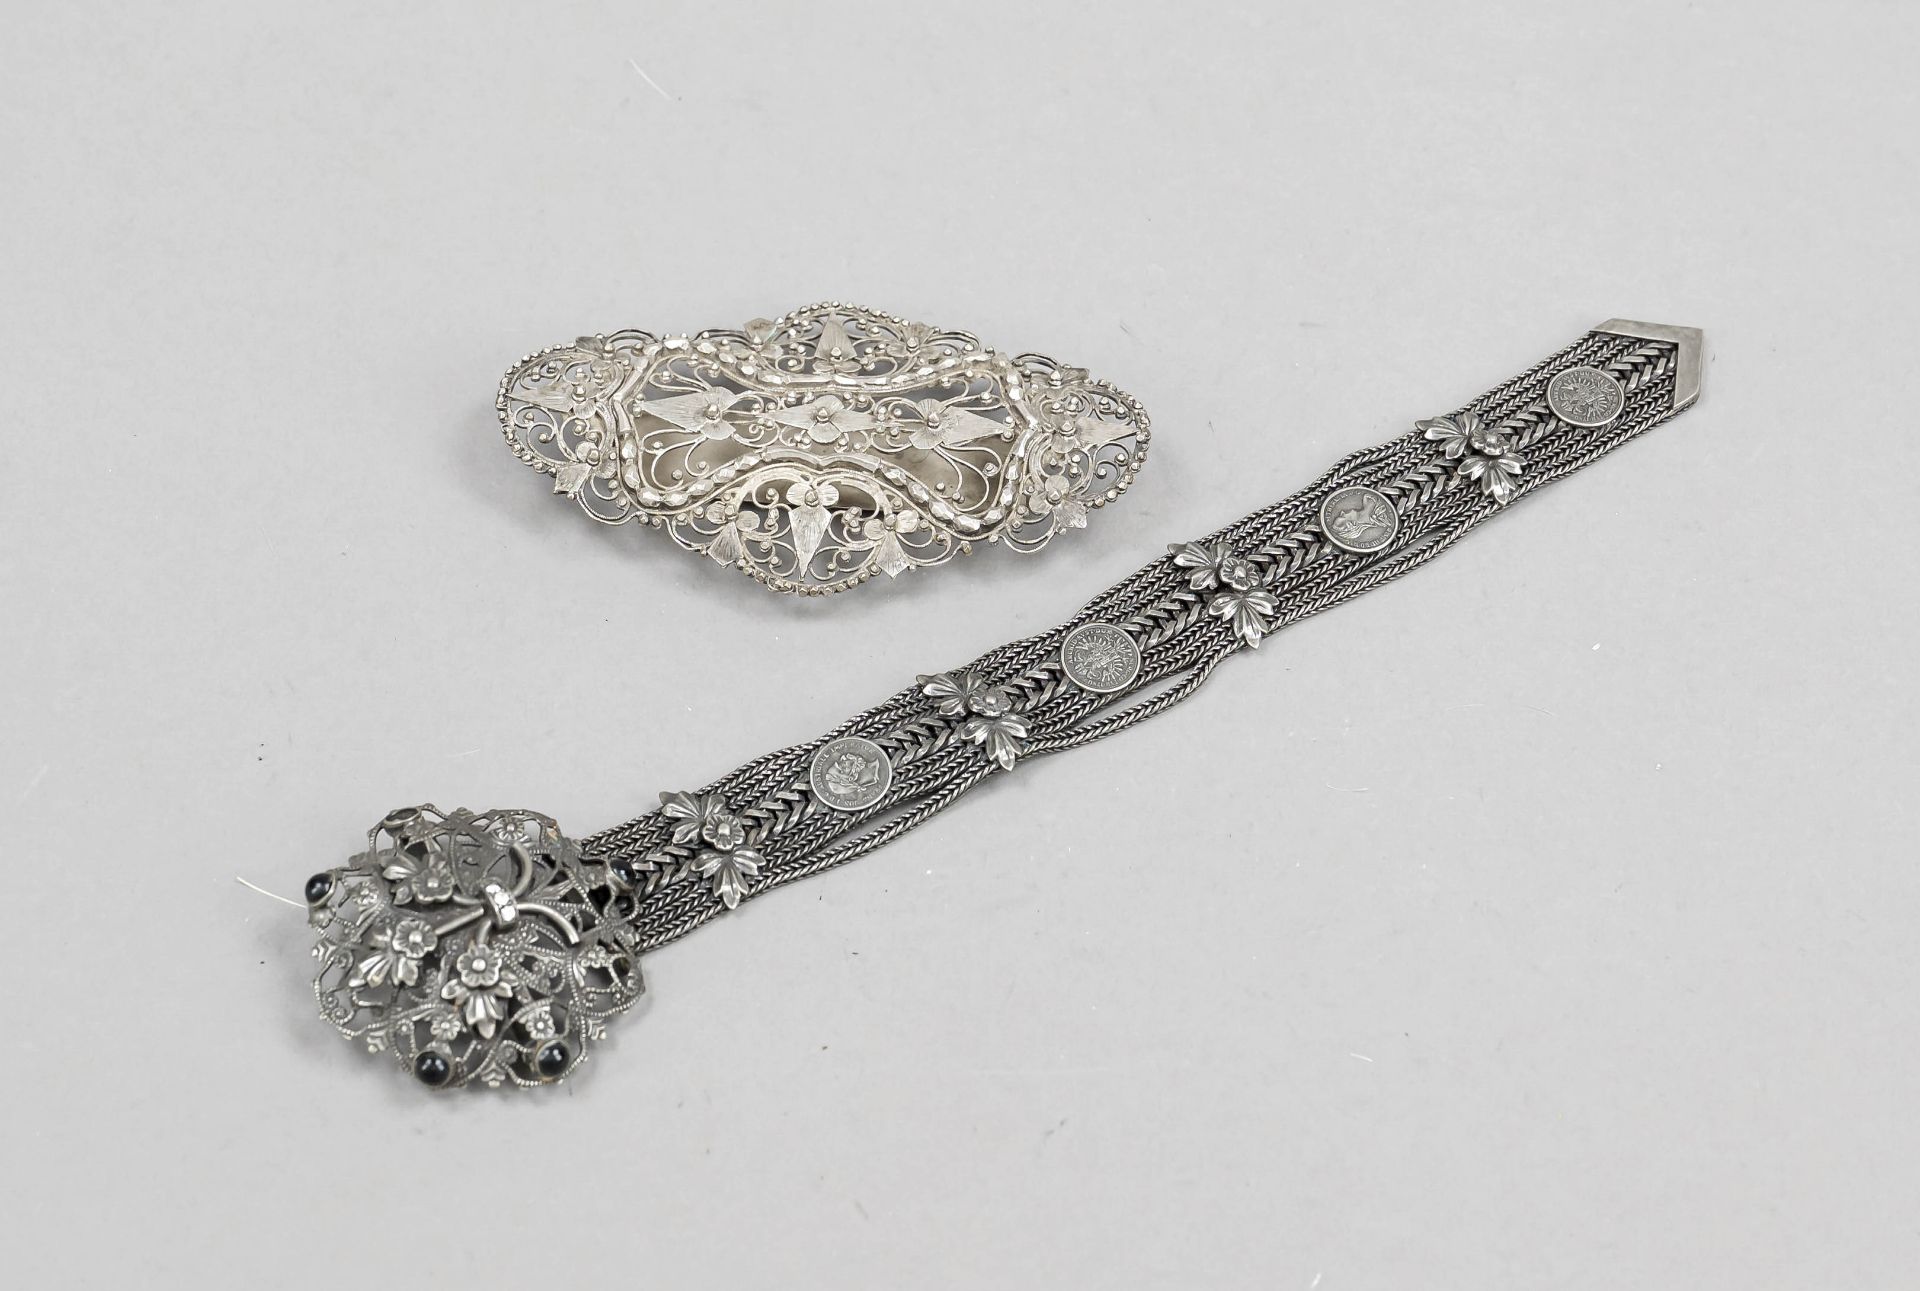 Two Pieces of Traditional Costume Jewelry, 20th century, silver tested or plated, pin with